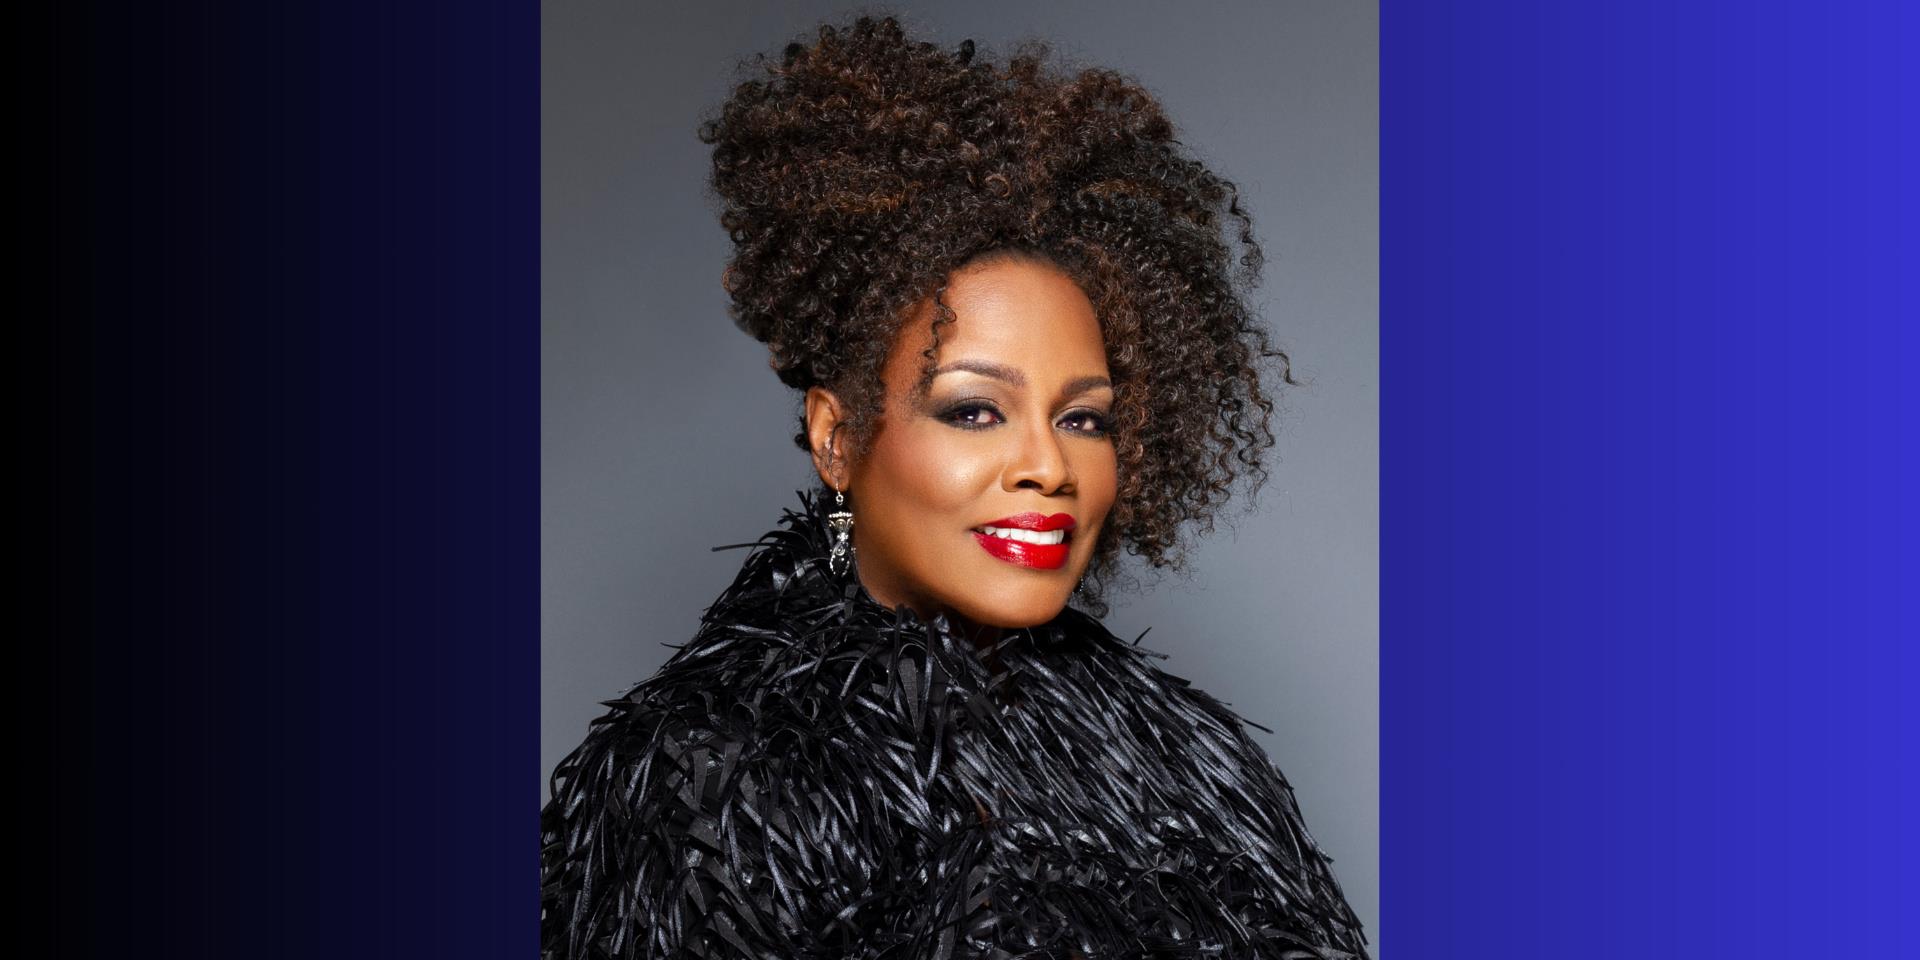 Music for a Great Space presents Dianne Reeves